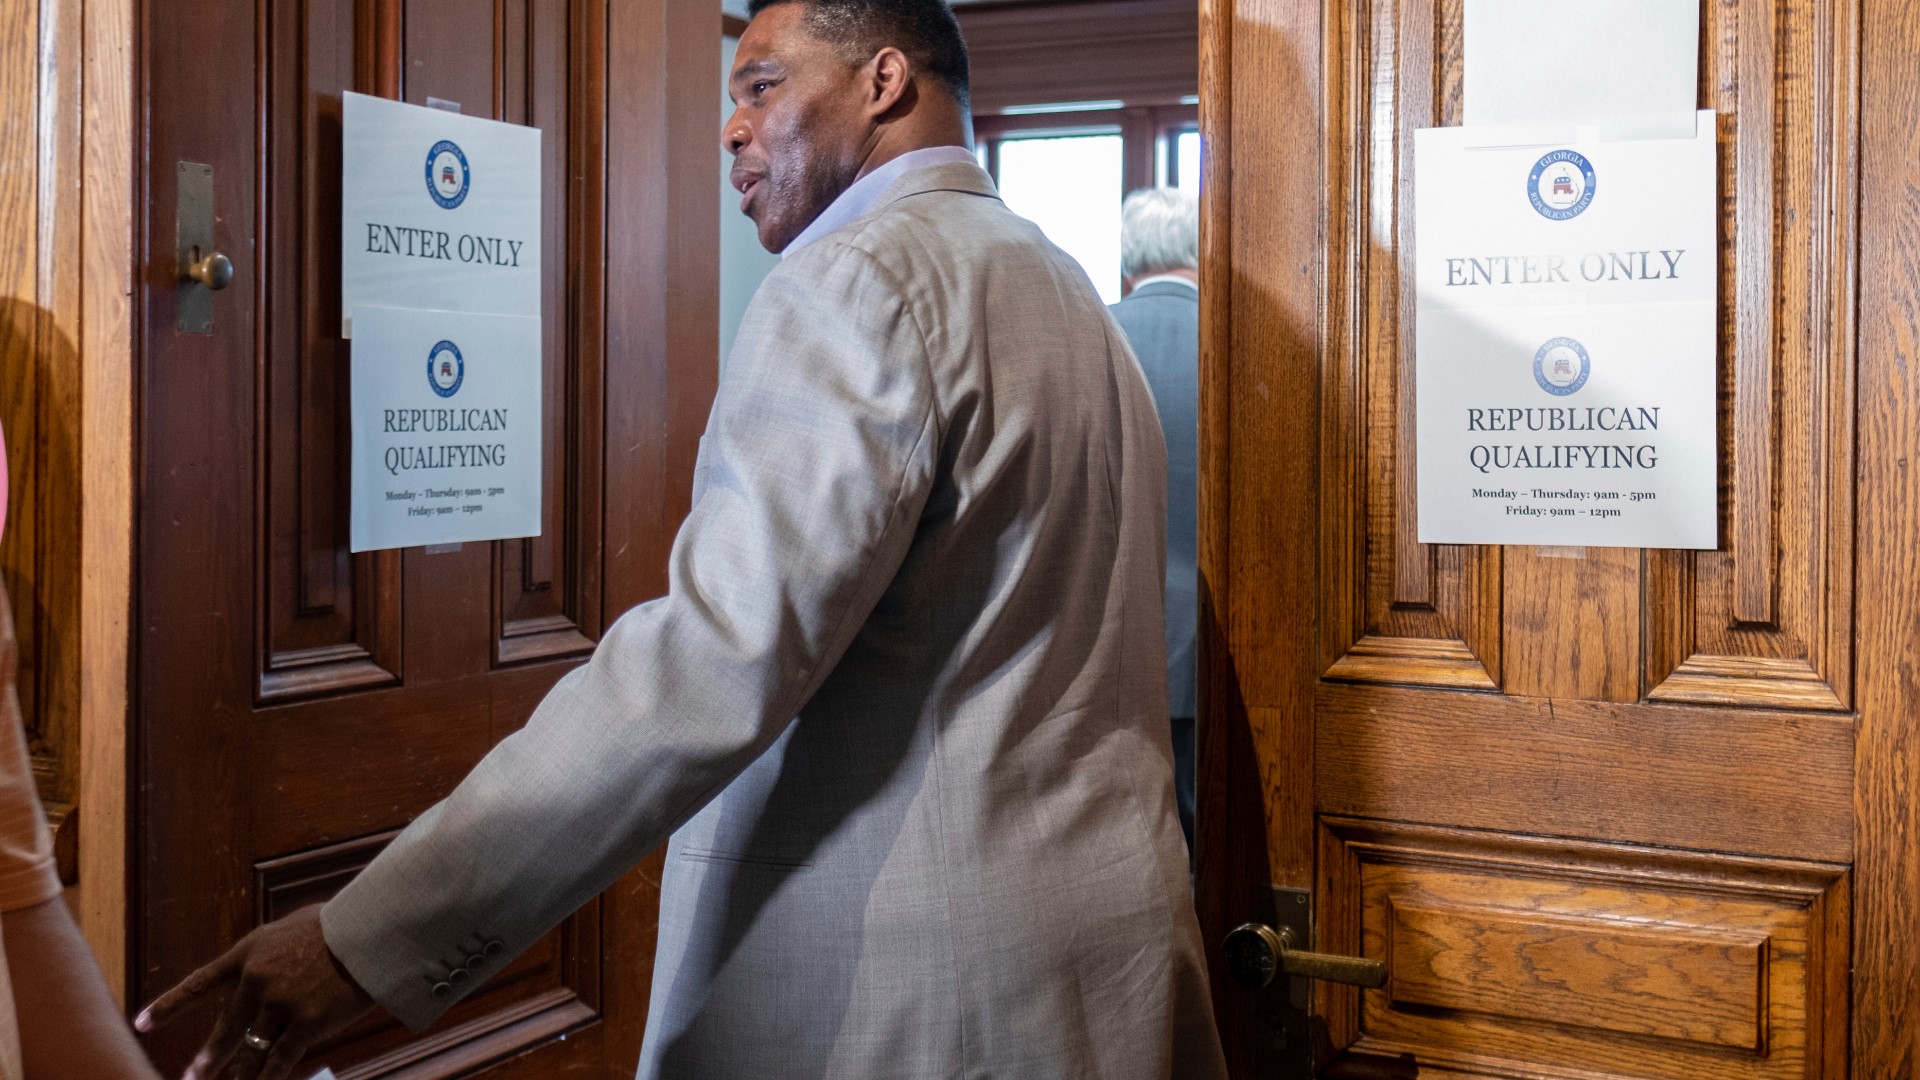 US Senate candidate Herschel Walker made a rare appearance in front of reporters Monday, moments after he qualified to run for the Republican nomination in May.